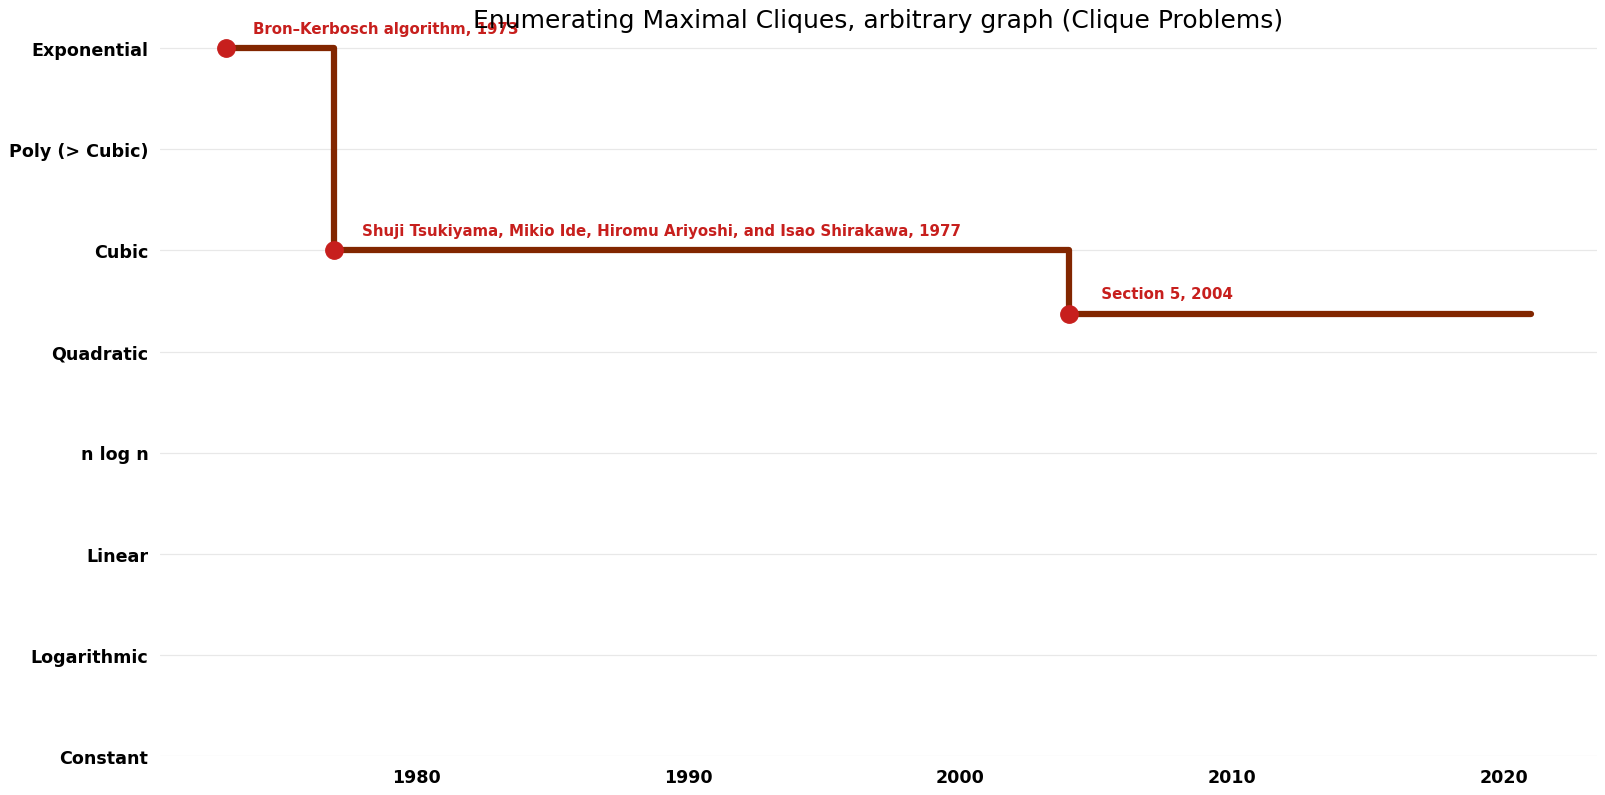 File:Clique Problems - Enumerating Maximal Cliques, arbitrary graph - Time.png